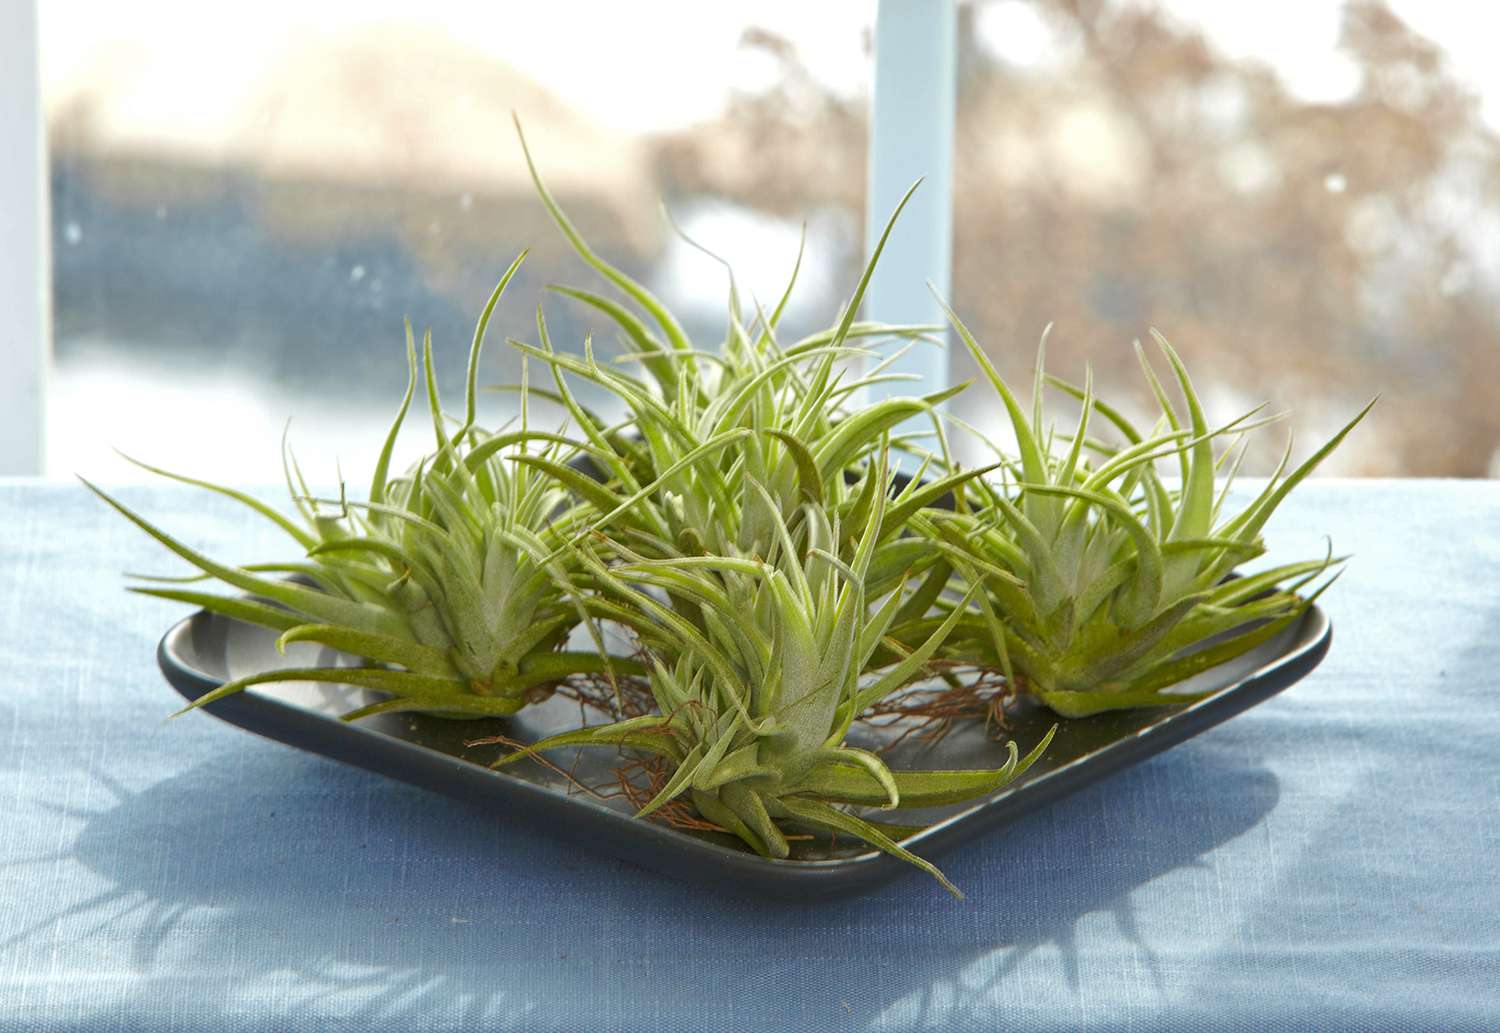 How to Grow and Care for Air Plants | Better Homes & Gardens